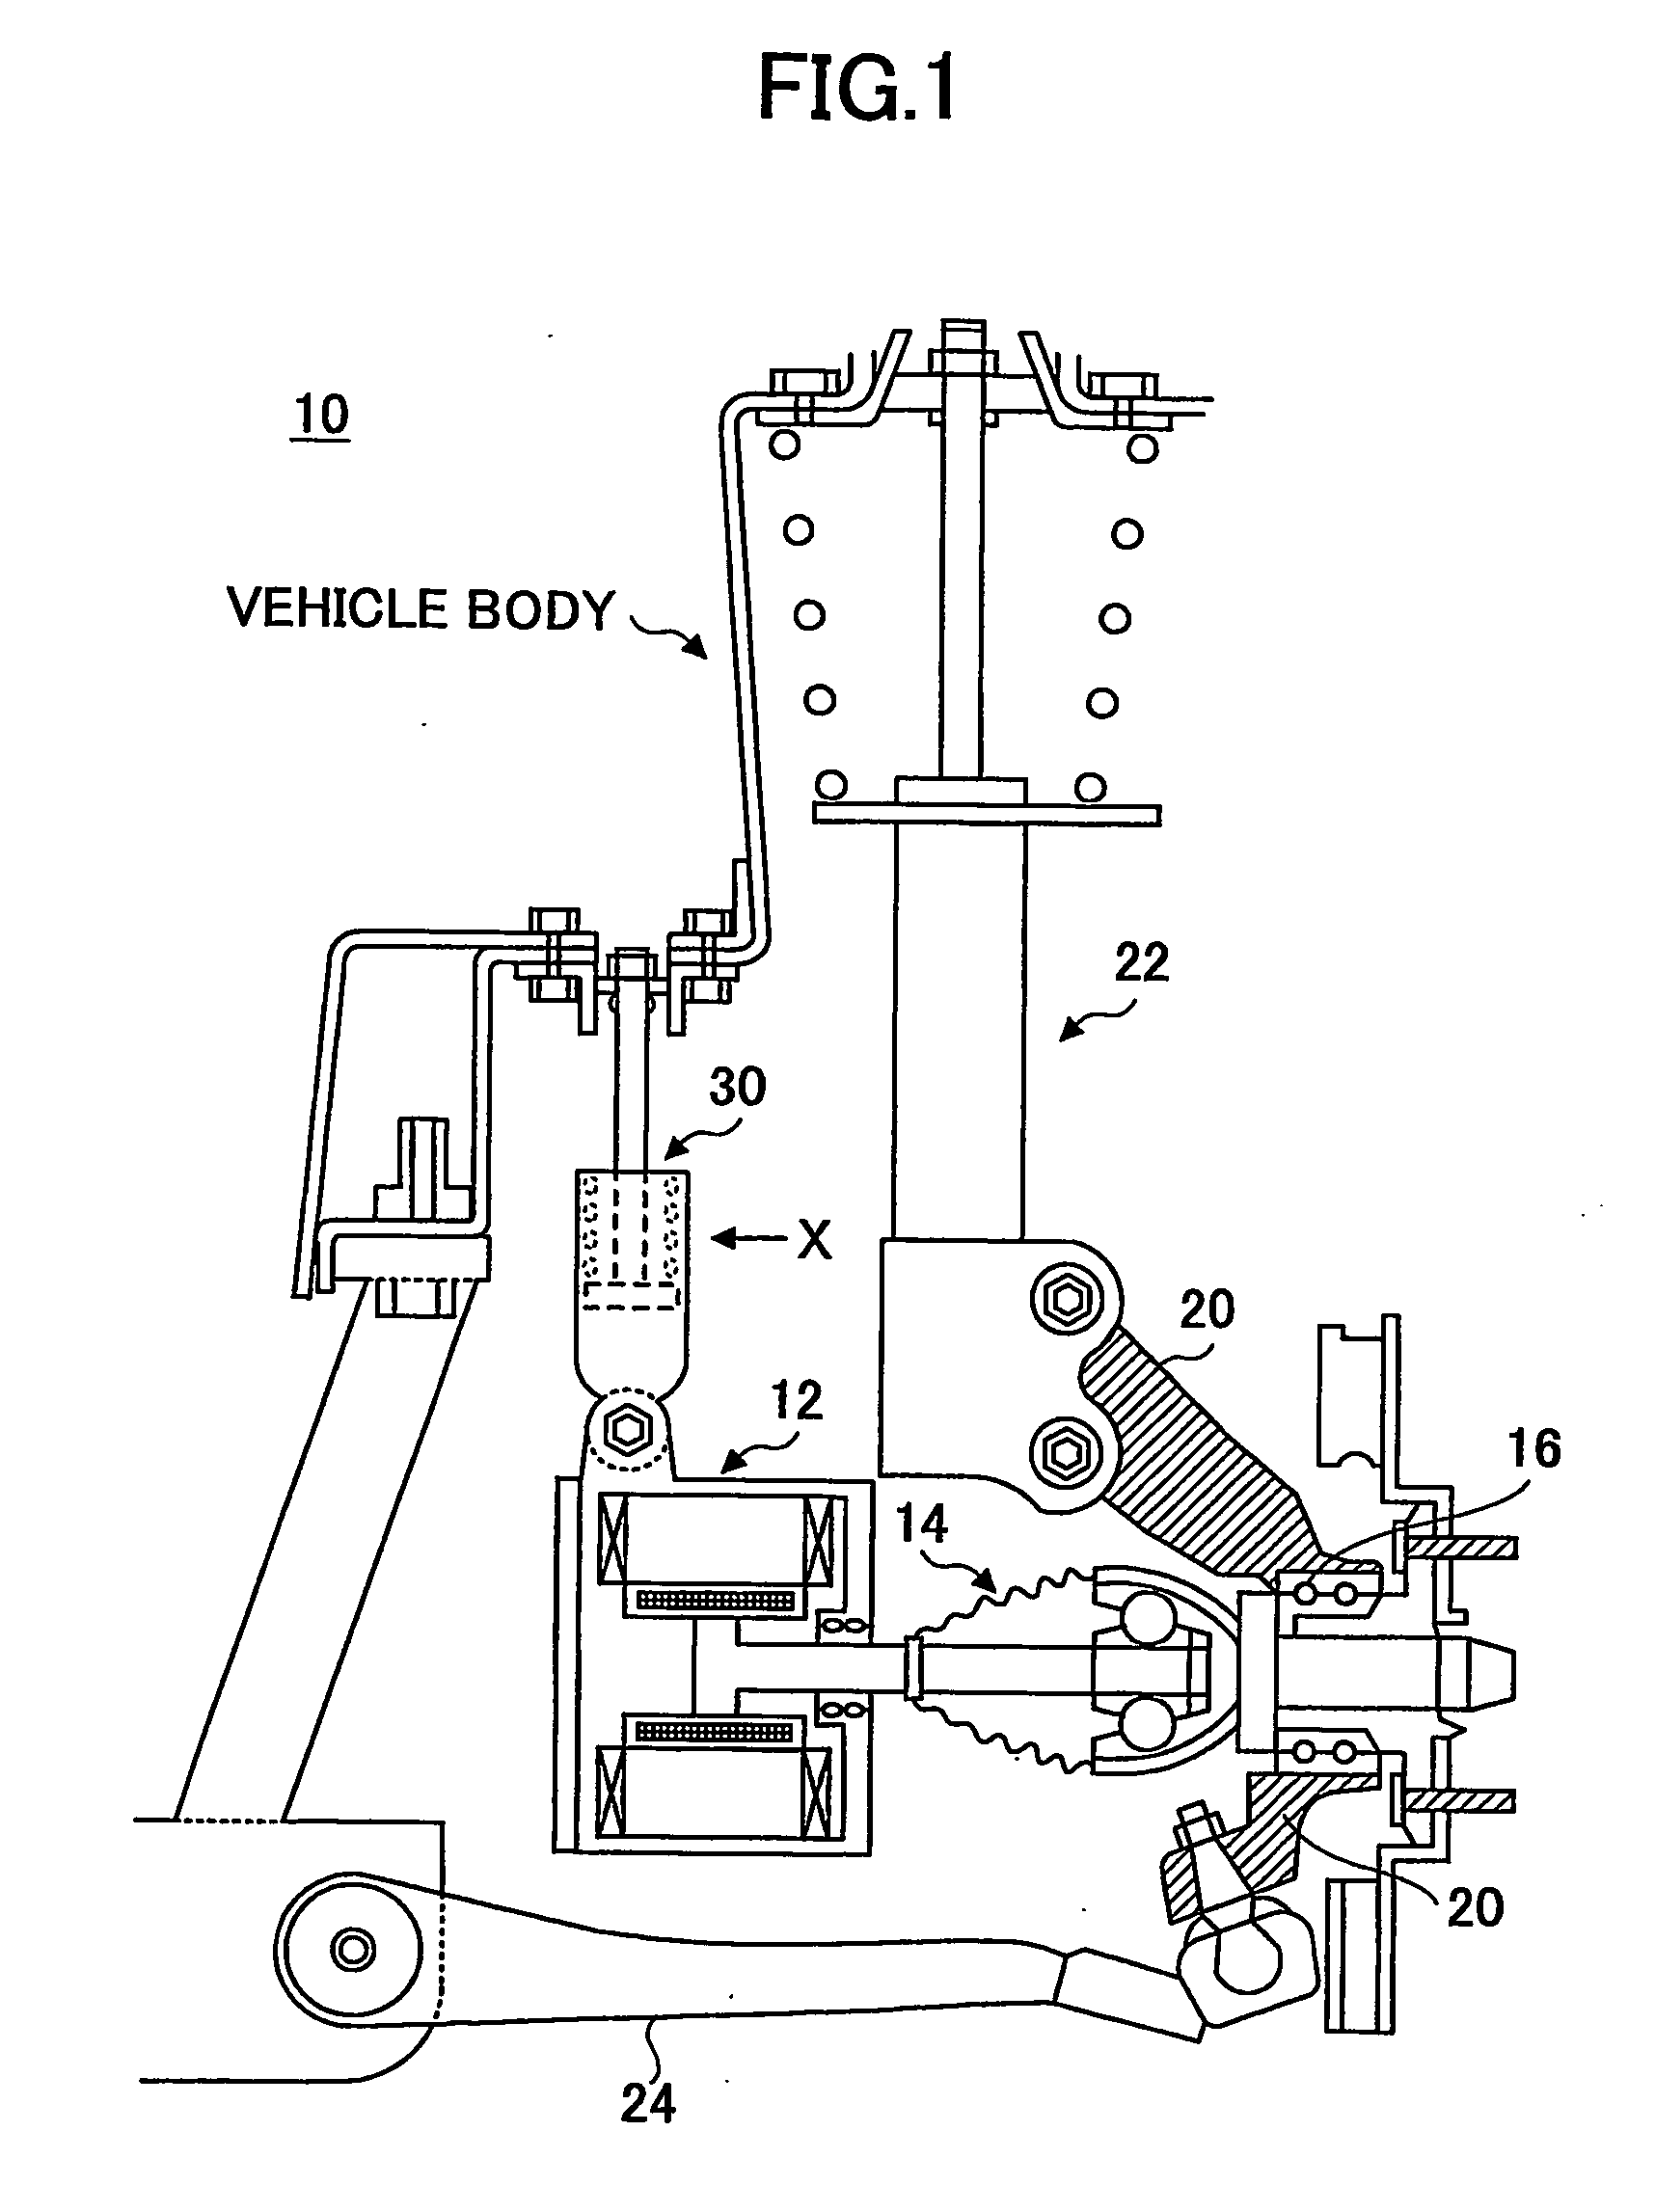 Suspension system for electric vehicle